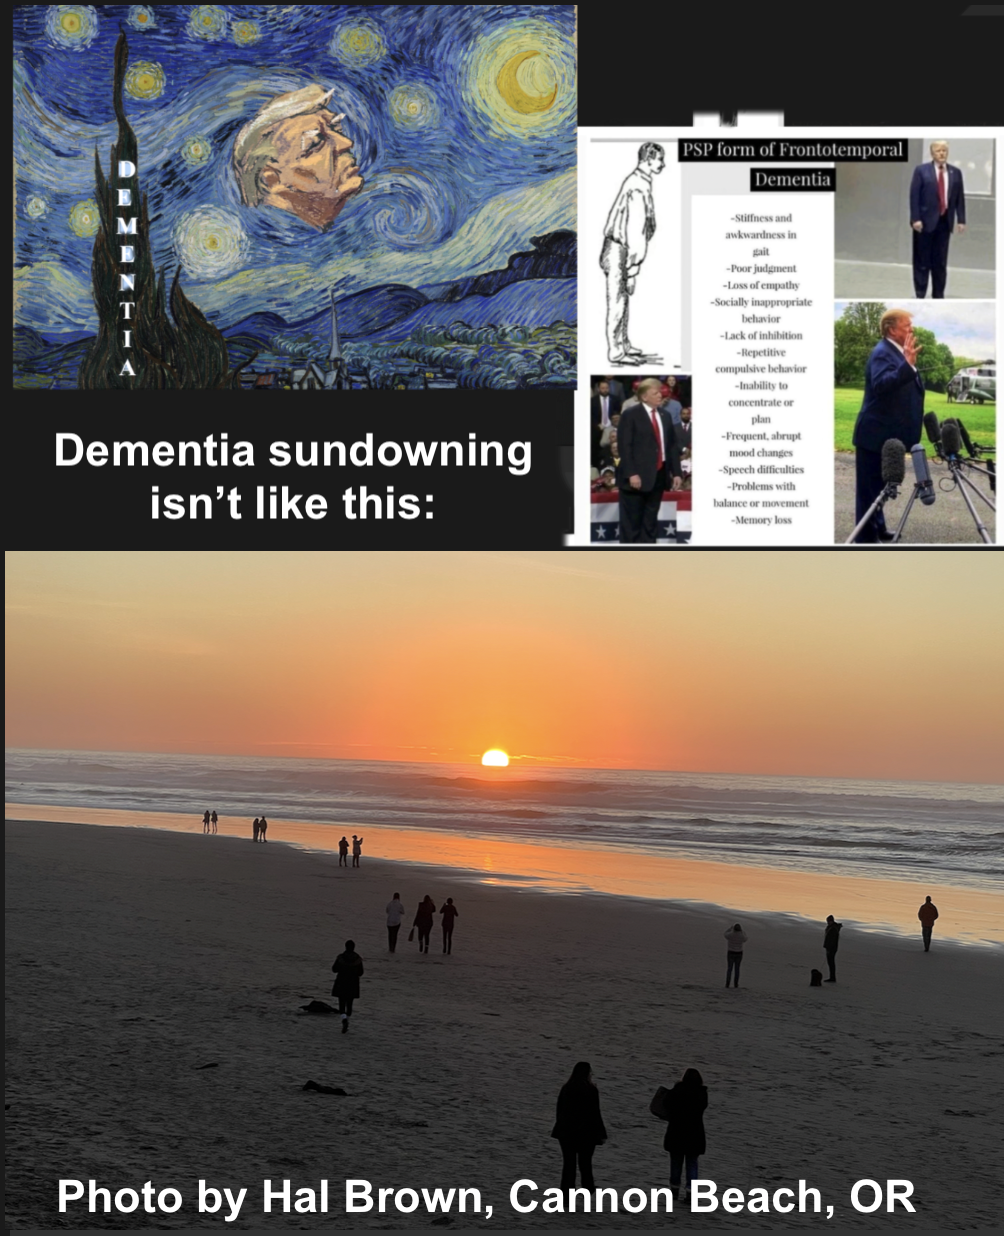 The media is covering all the indications that Trump has early dementia, but not nearly enough. Dementia always gets worse and in the early phases more symptoms occur iin the evening and at night. This is called sundowning. By Hal Brown, MSW